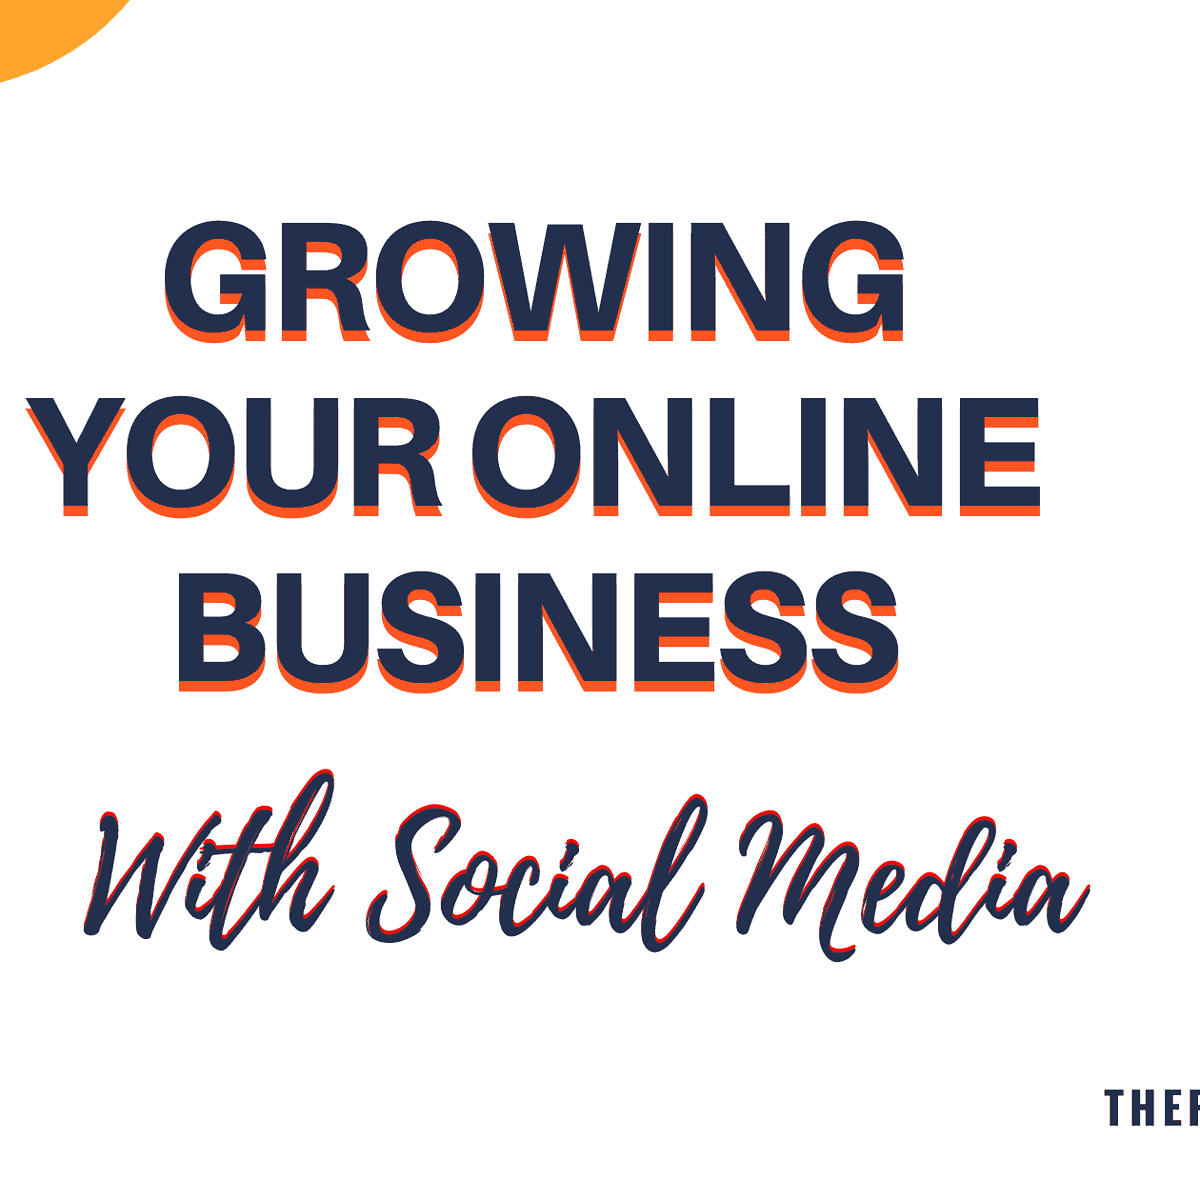 How to Grow Your Online Business with Social Media